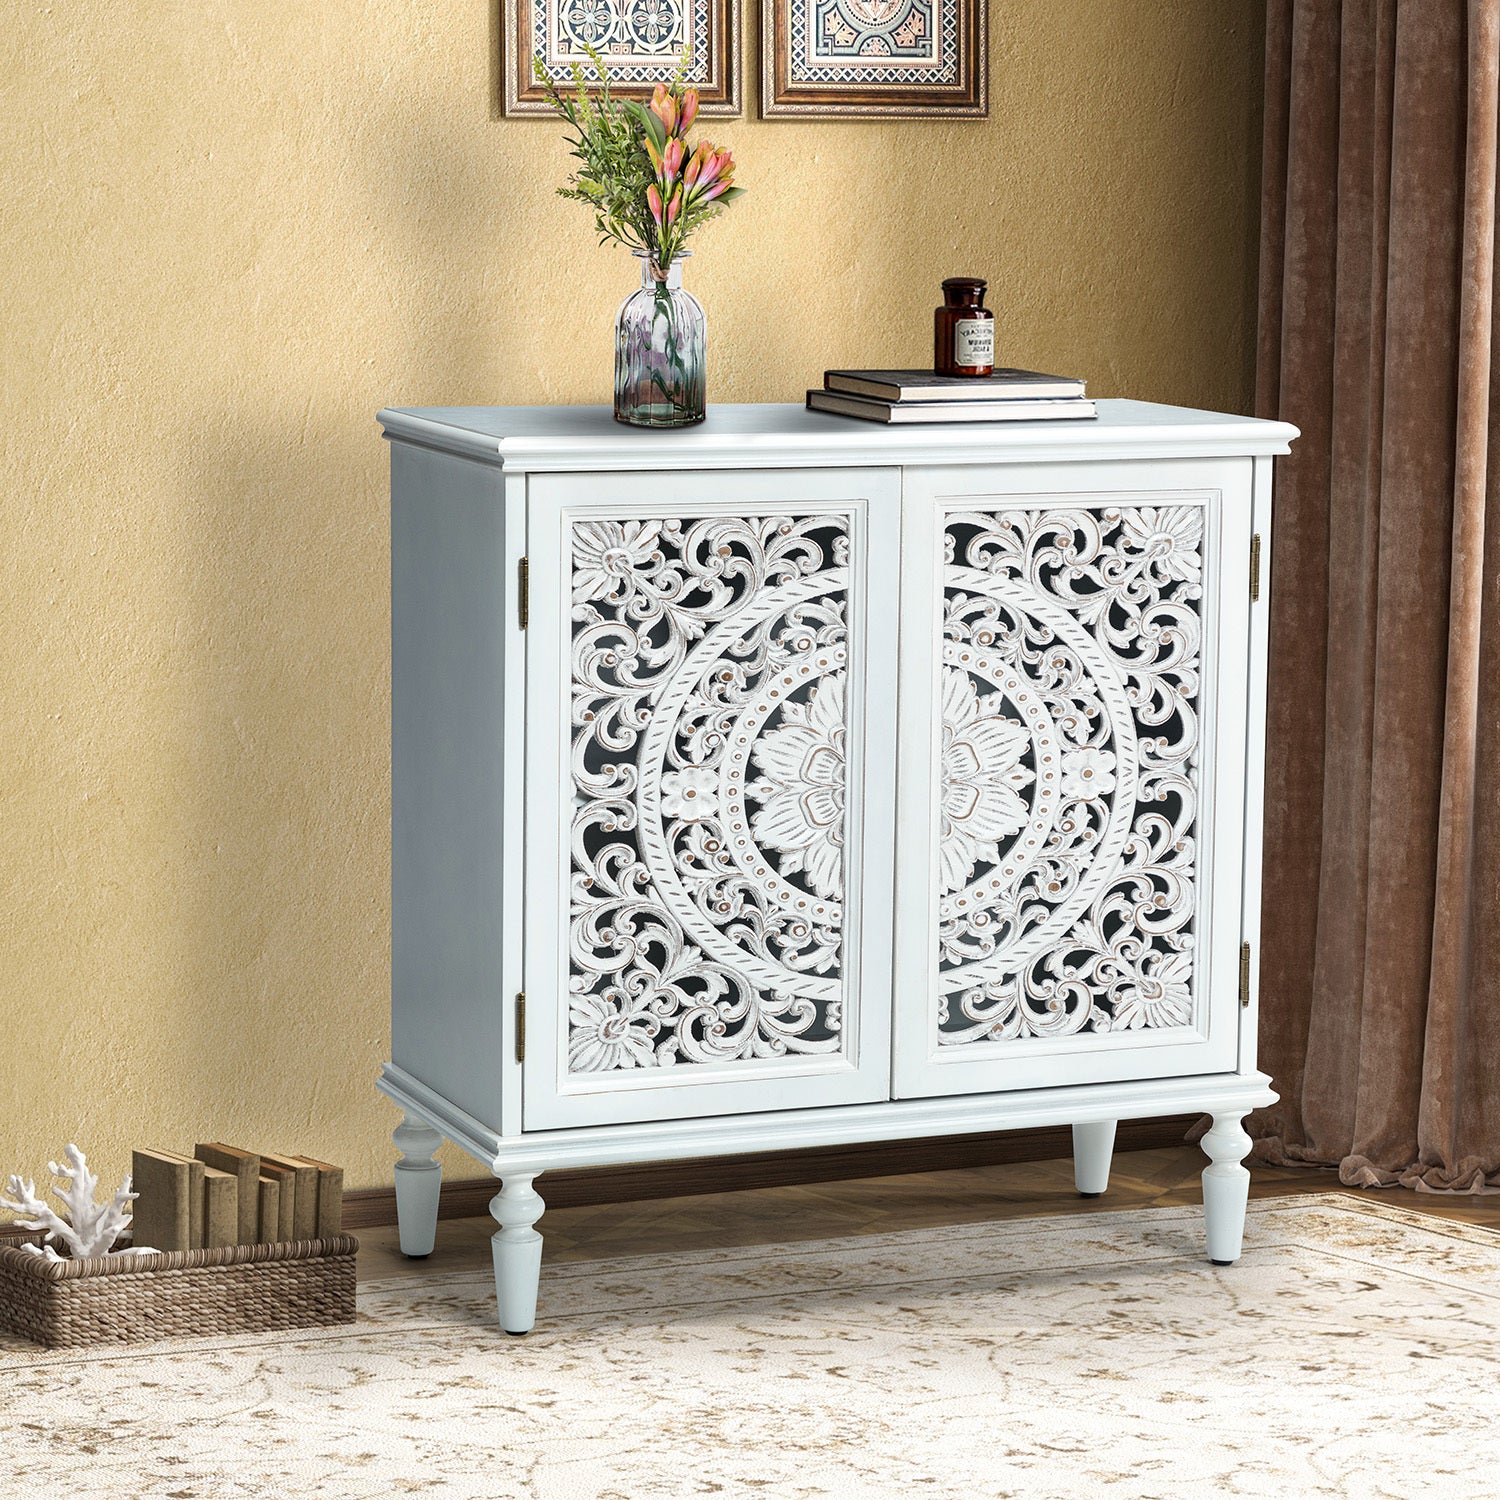 Melampous 32" Tall 2 Door Accent Cabinet GRAY